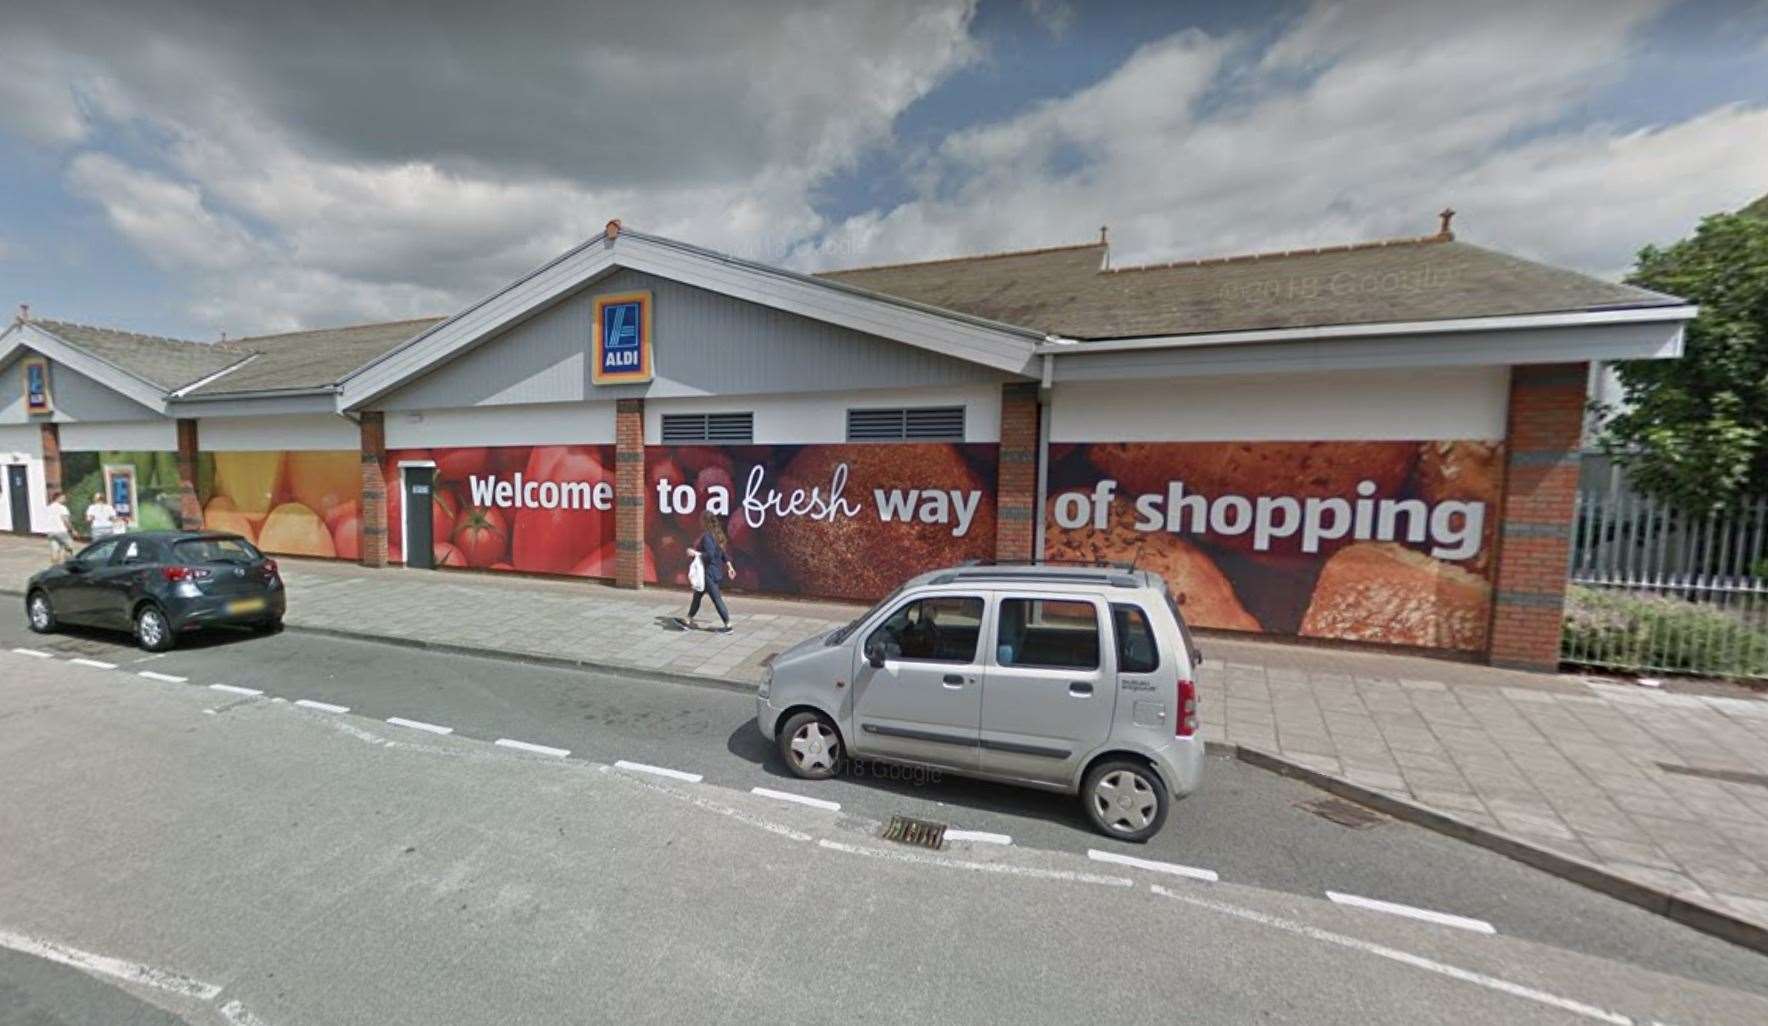 Two women have been charged after a spate of shoplifting from stores across Sittingbourne, including Aldi in East Street. Picture: Google